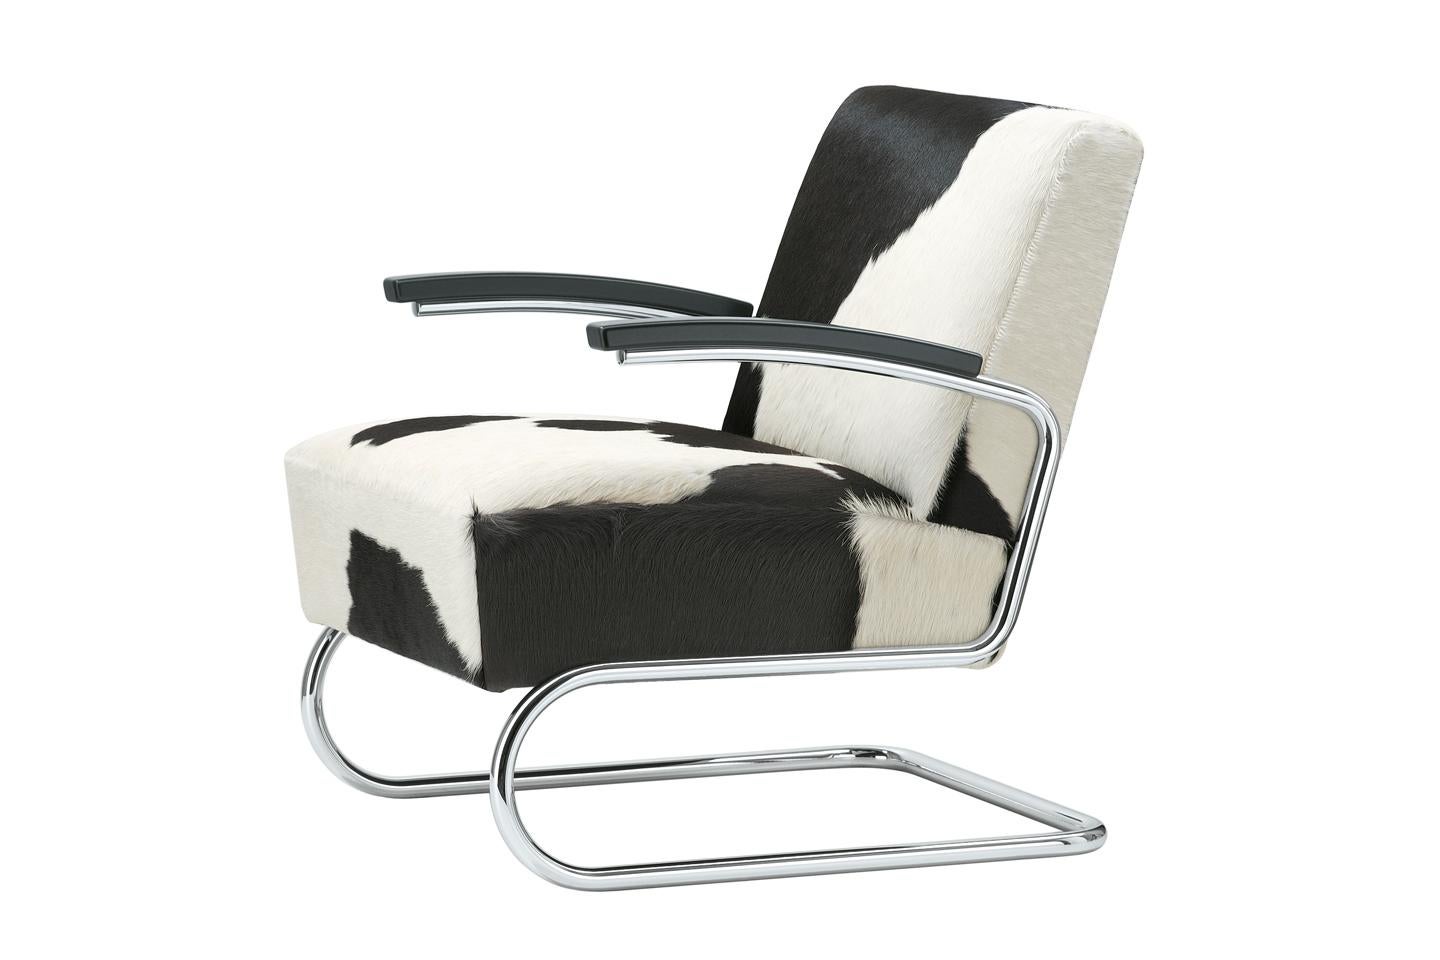 Range S 411
The outstanding properties of this armchair are elegance, timelessness and exceptional sitting comfort. Added is a lightness that only a cantilever model can have. While the first tubular steel chairs from the 1920s were rarely